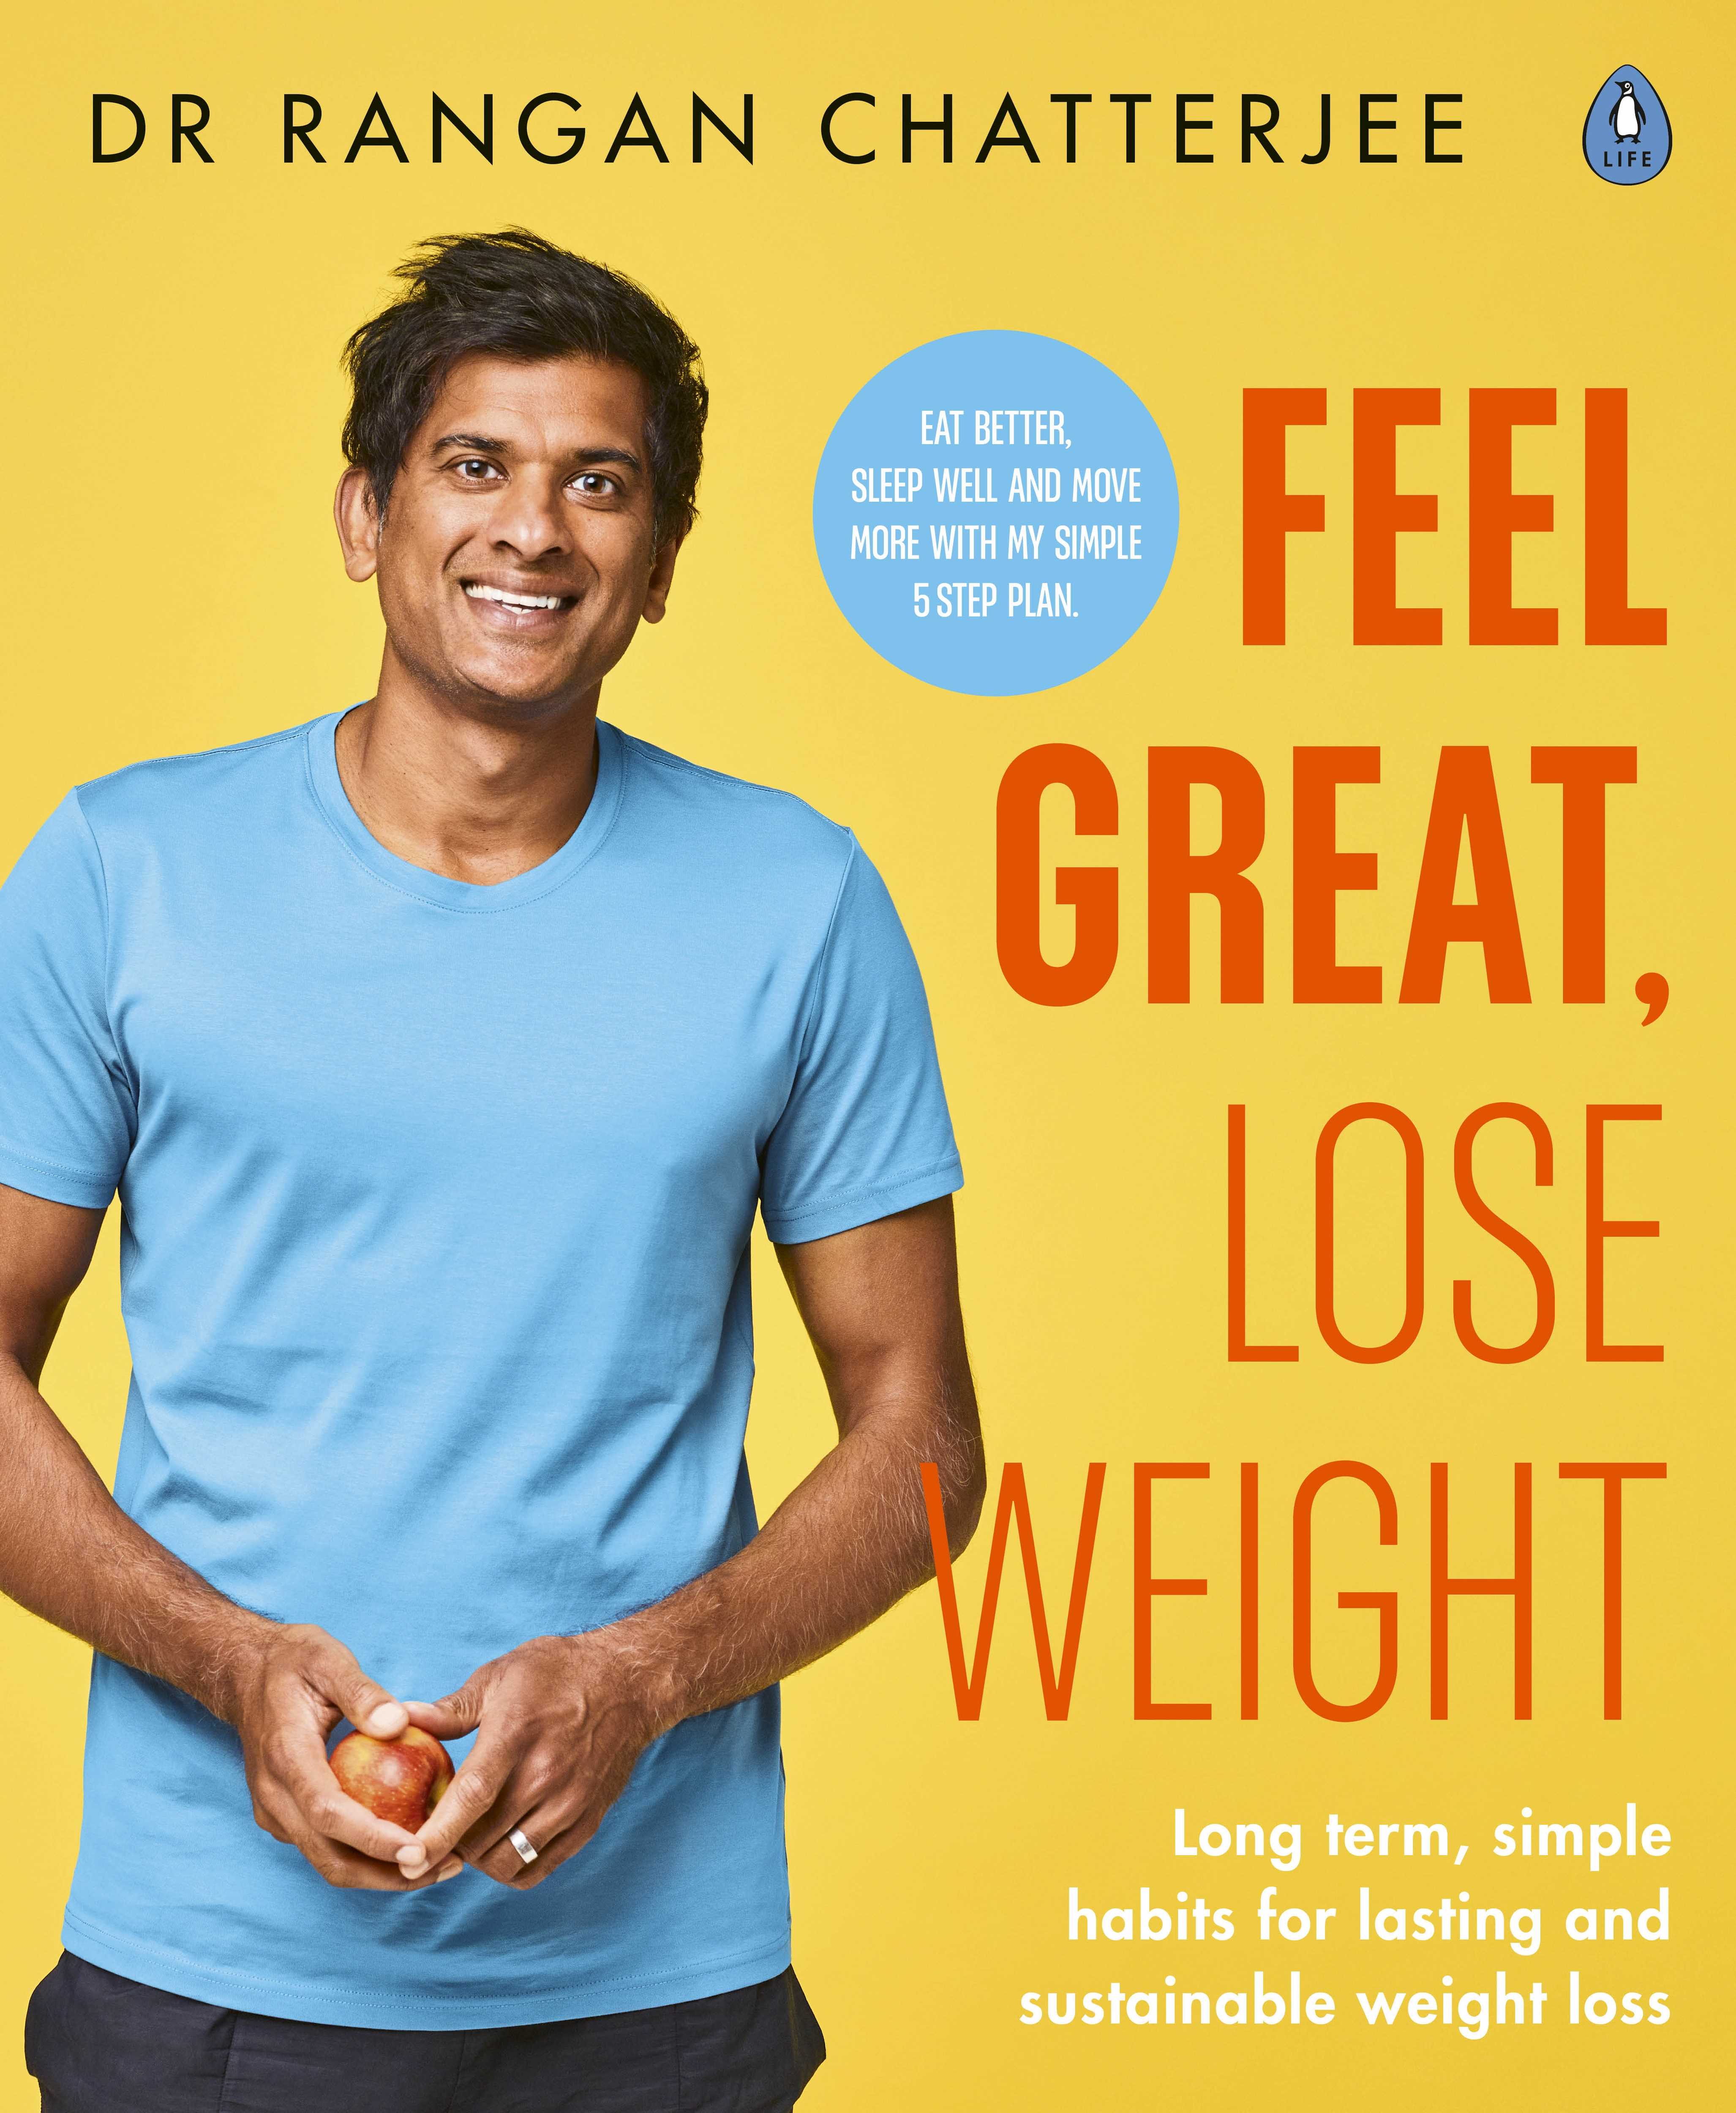 Lose Weight, Feel Great: The Doctor’s Plan